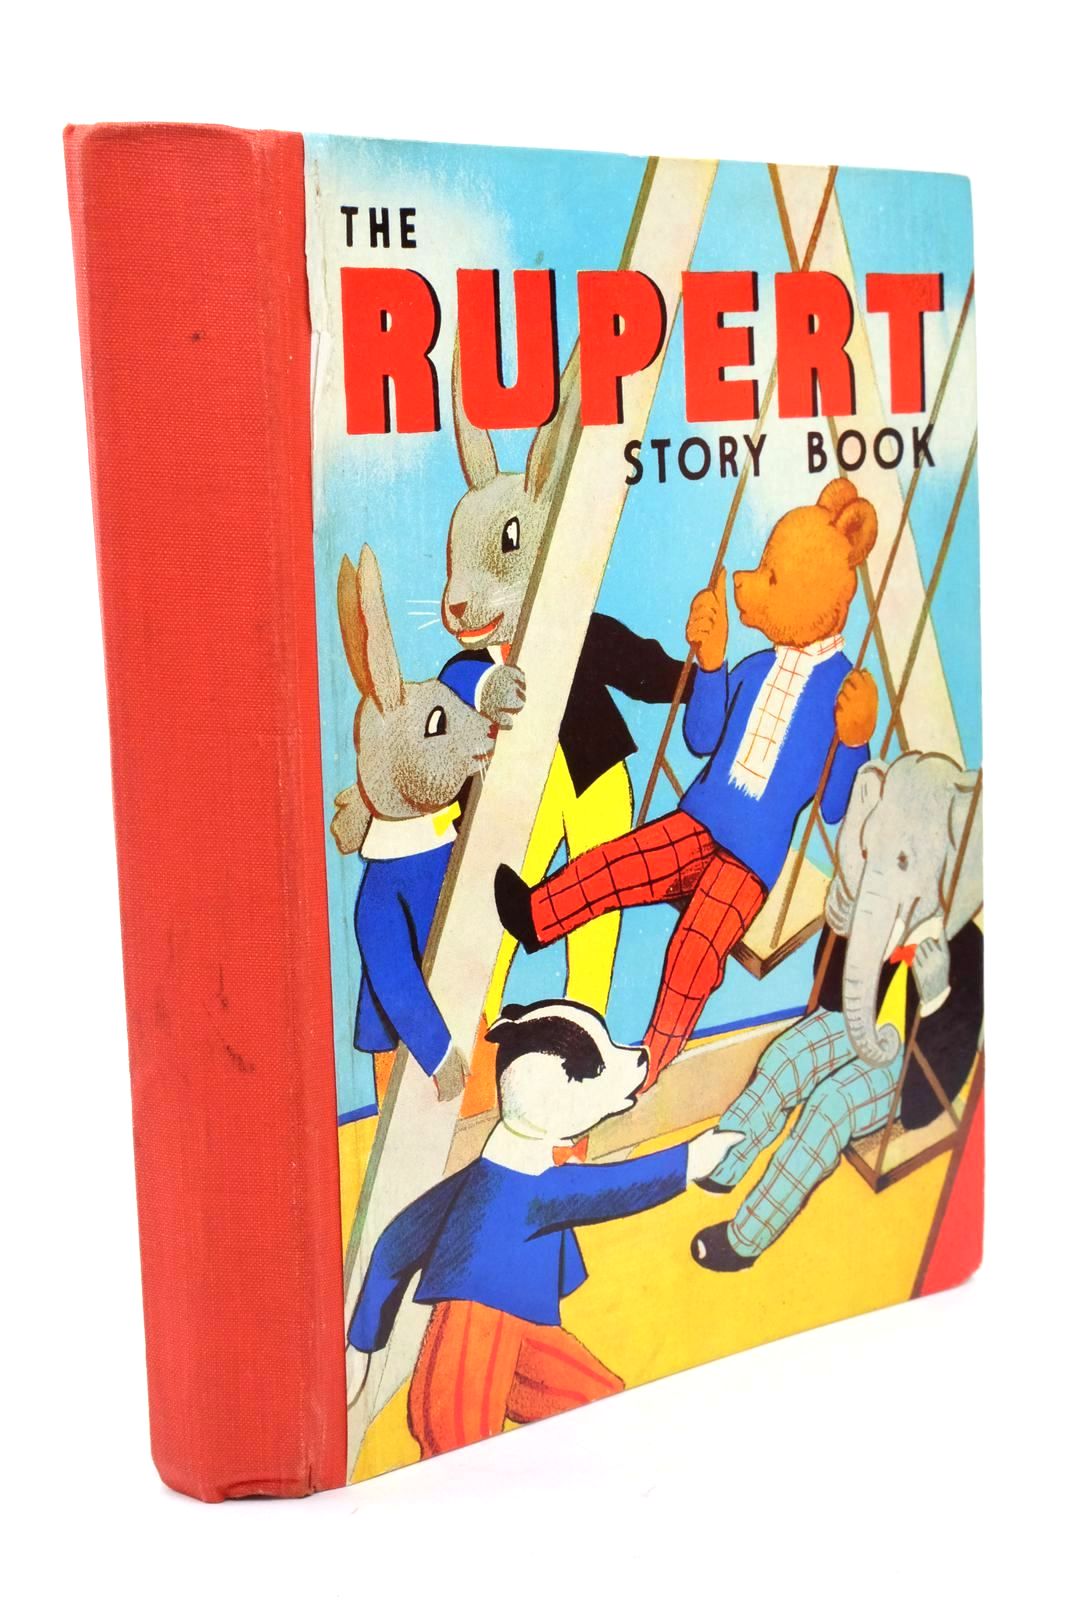 Photo of THE RUPERT STORY BOOK written by Tourtel, Mary illustrated by Tourtel, Mary published by Sampson Low, Marston &amp; Co. Ltd. (STOCK CODE: 1322506)  for sale by Stella & Rose's Books